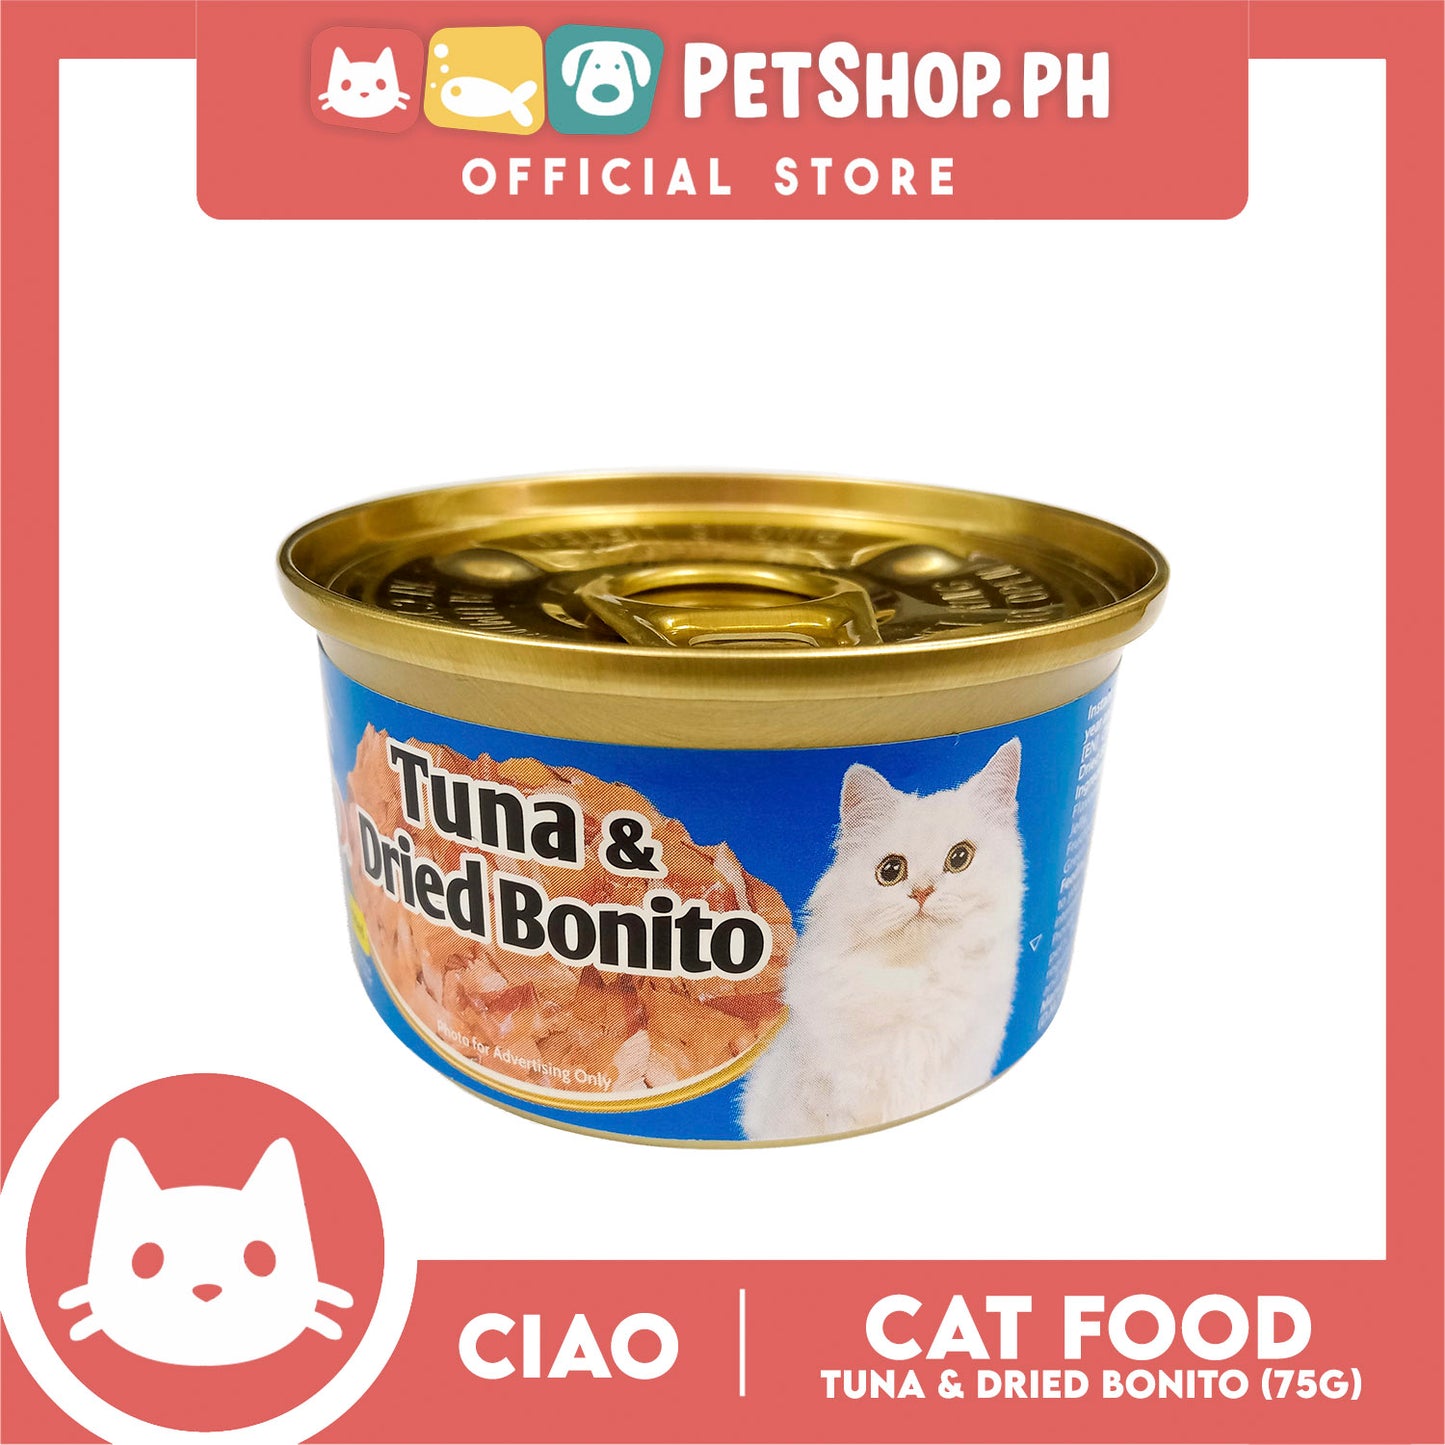 Ciao Tuna and Dried Bonito 75g Cat Canned Wet Food